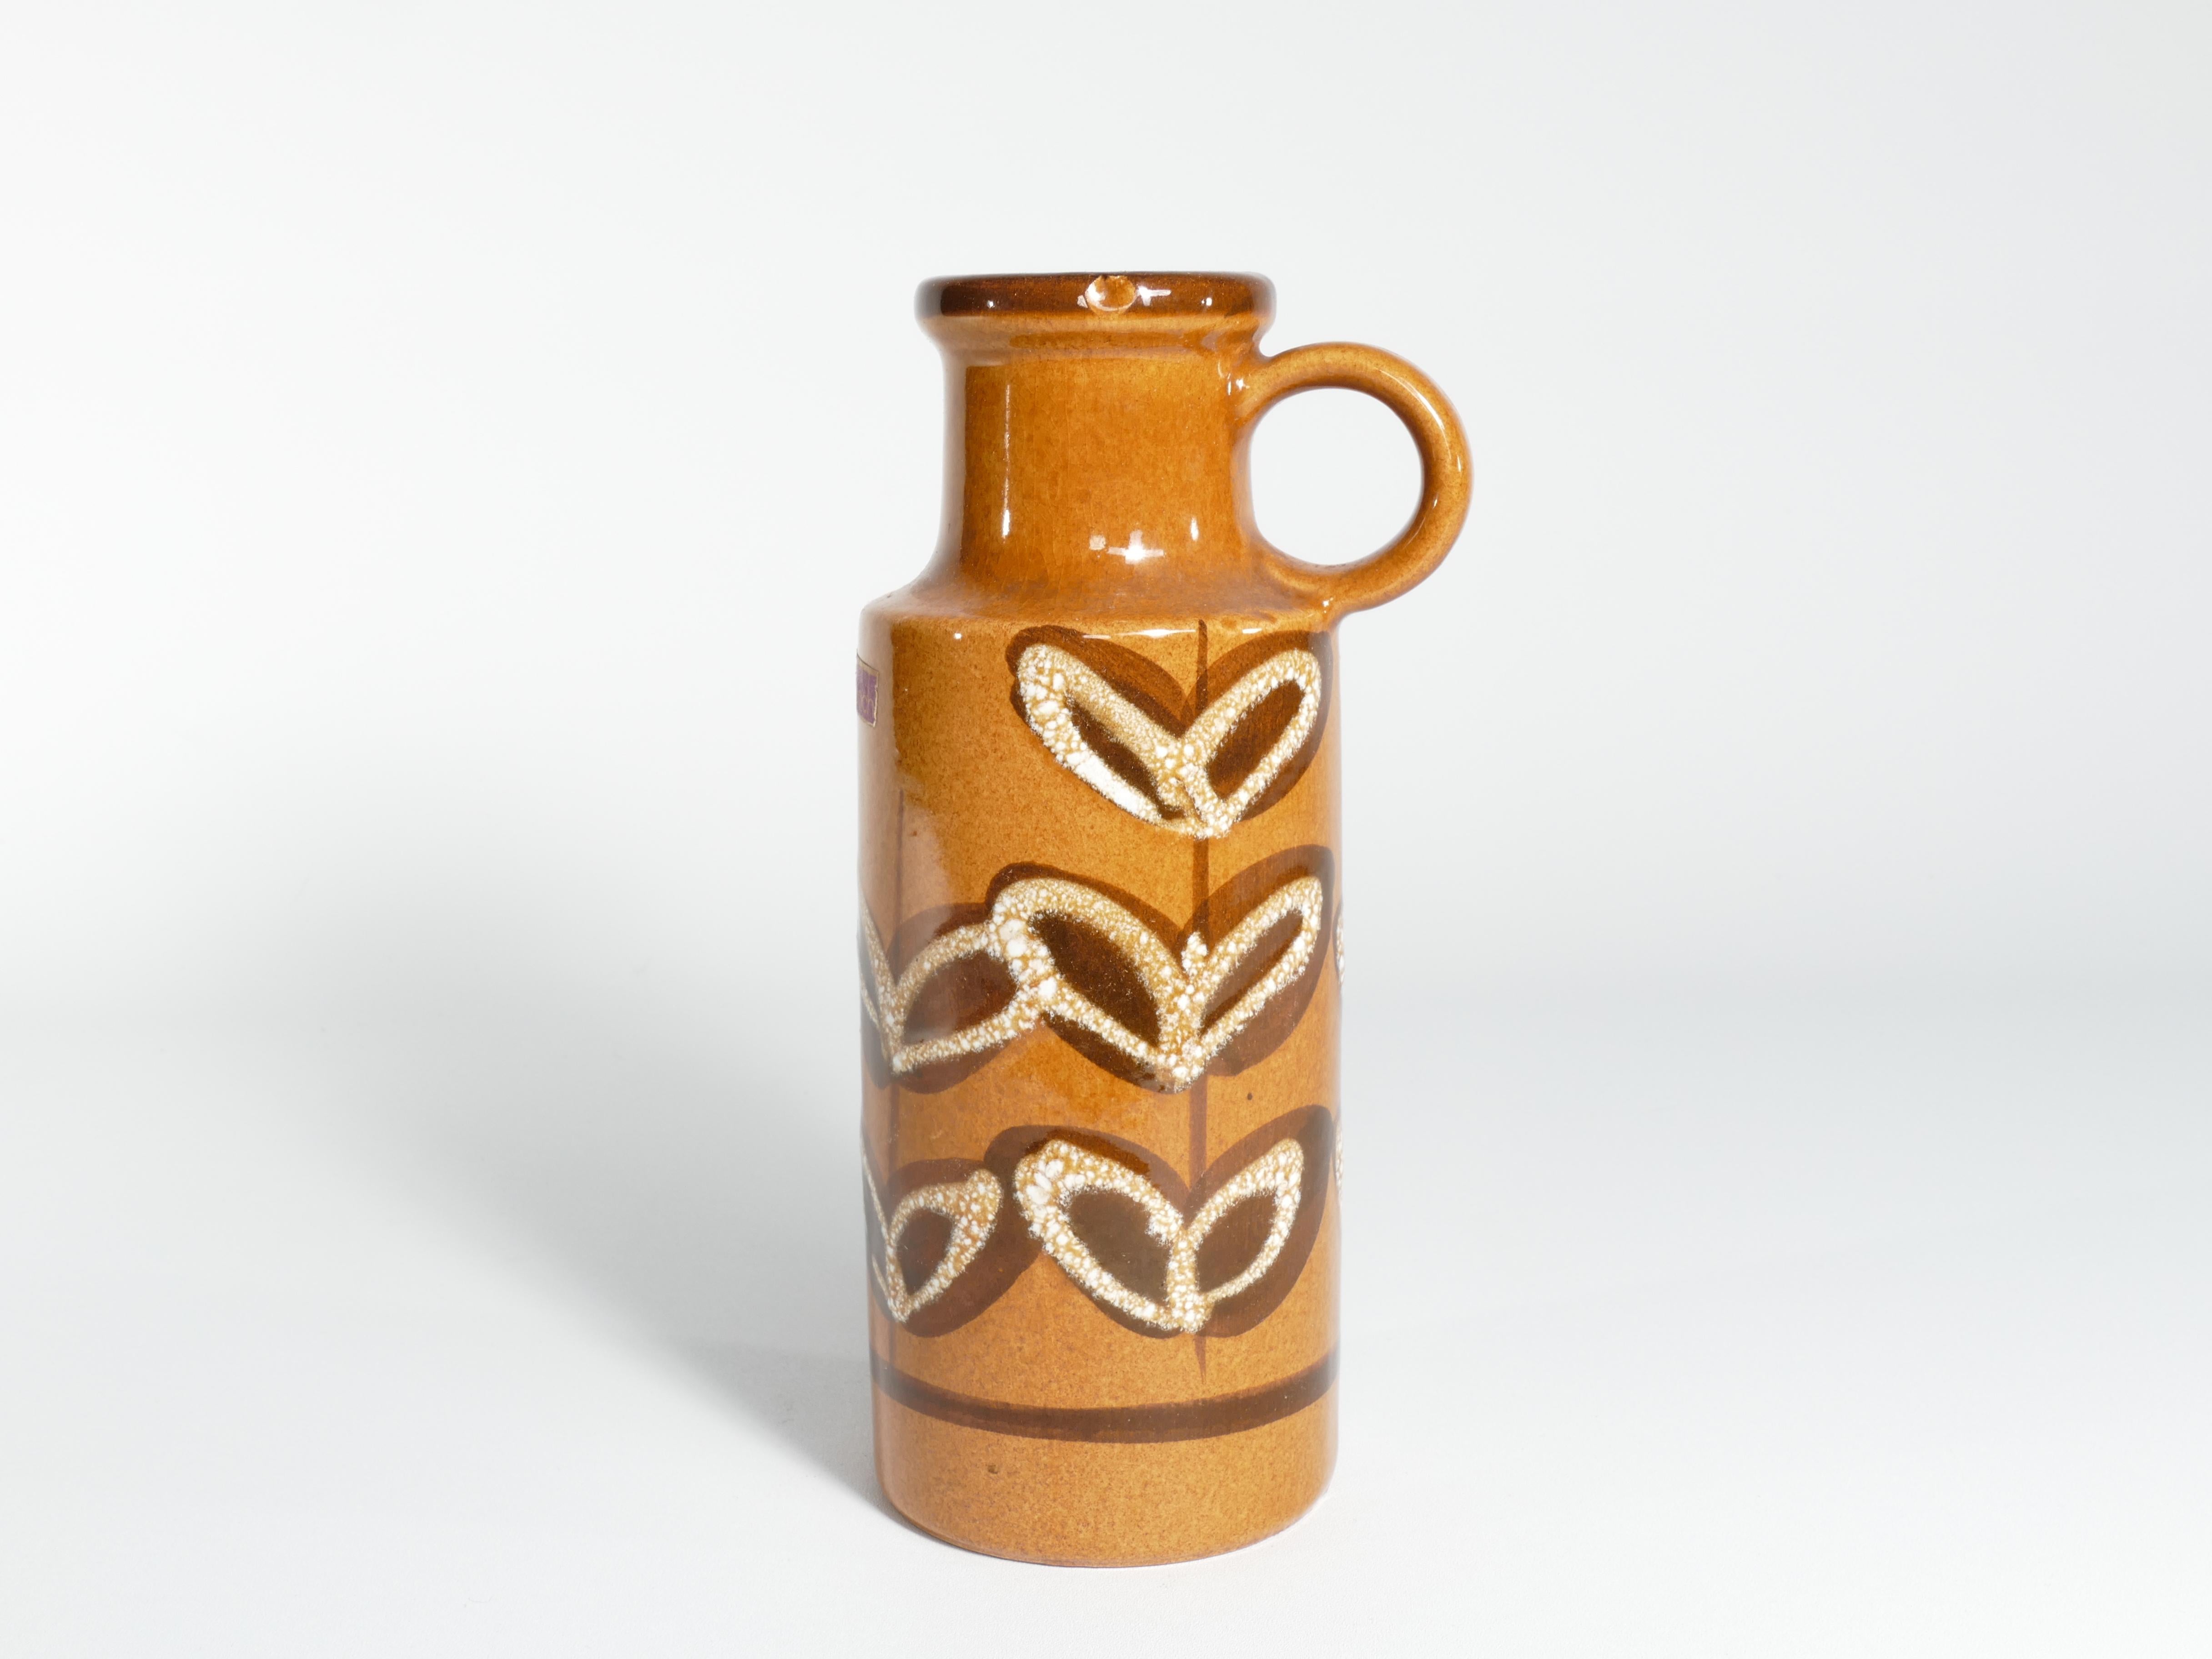 Mustard yellow vase with beautiful brown and white leaf details.
This is a nice example of a piece of collectible West German art pottery by Scheurich Keramik.

The base is moulded with the words ‘W.GERMANY’ and the model number 401 – 20. All the